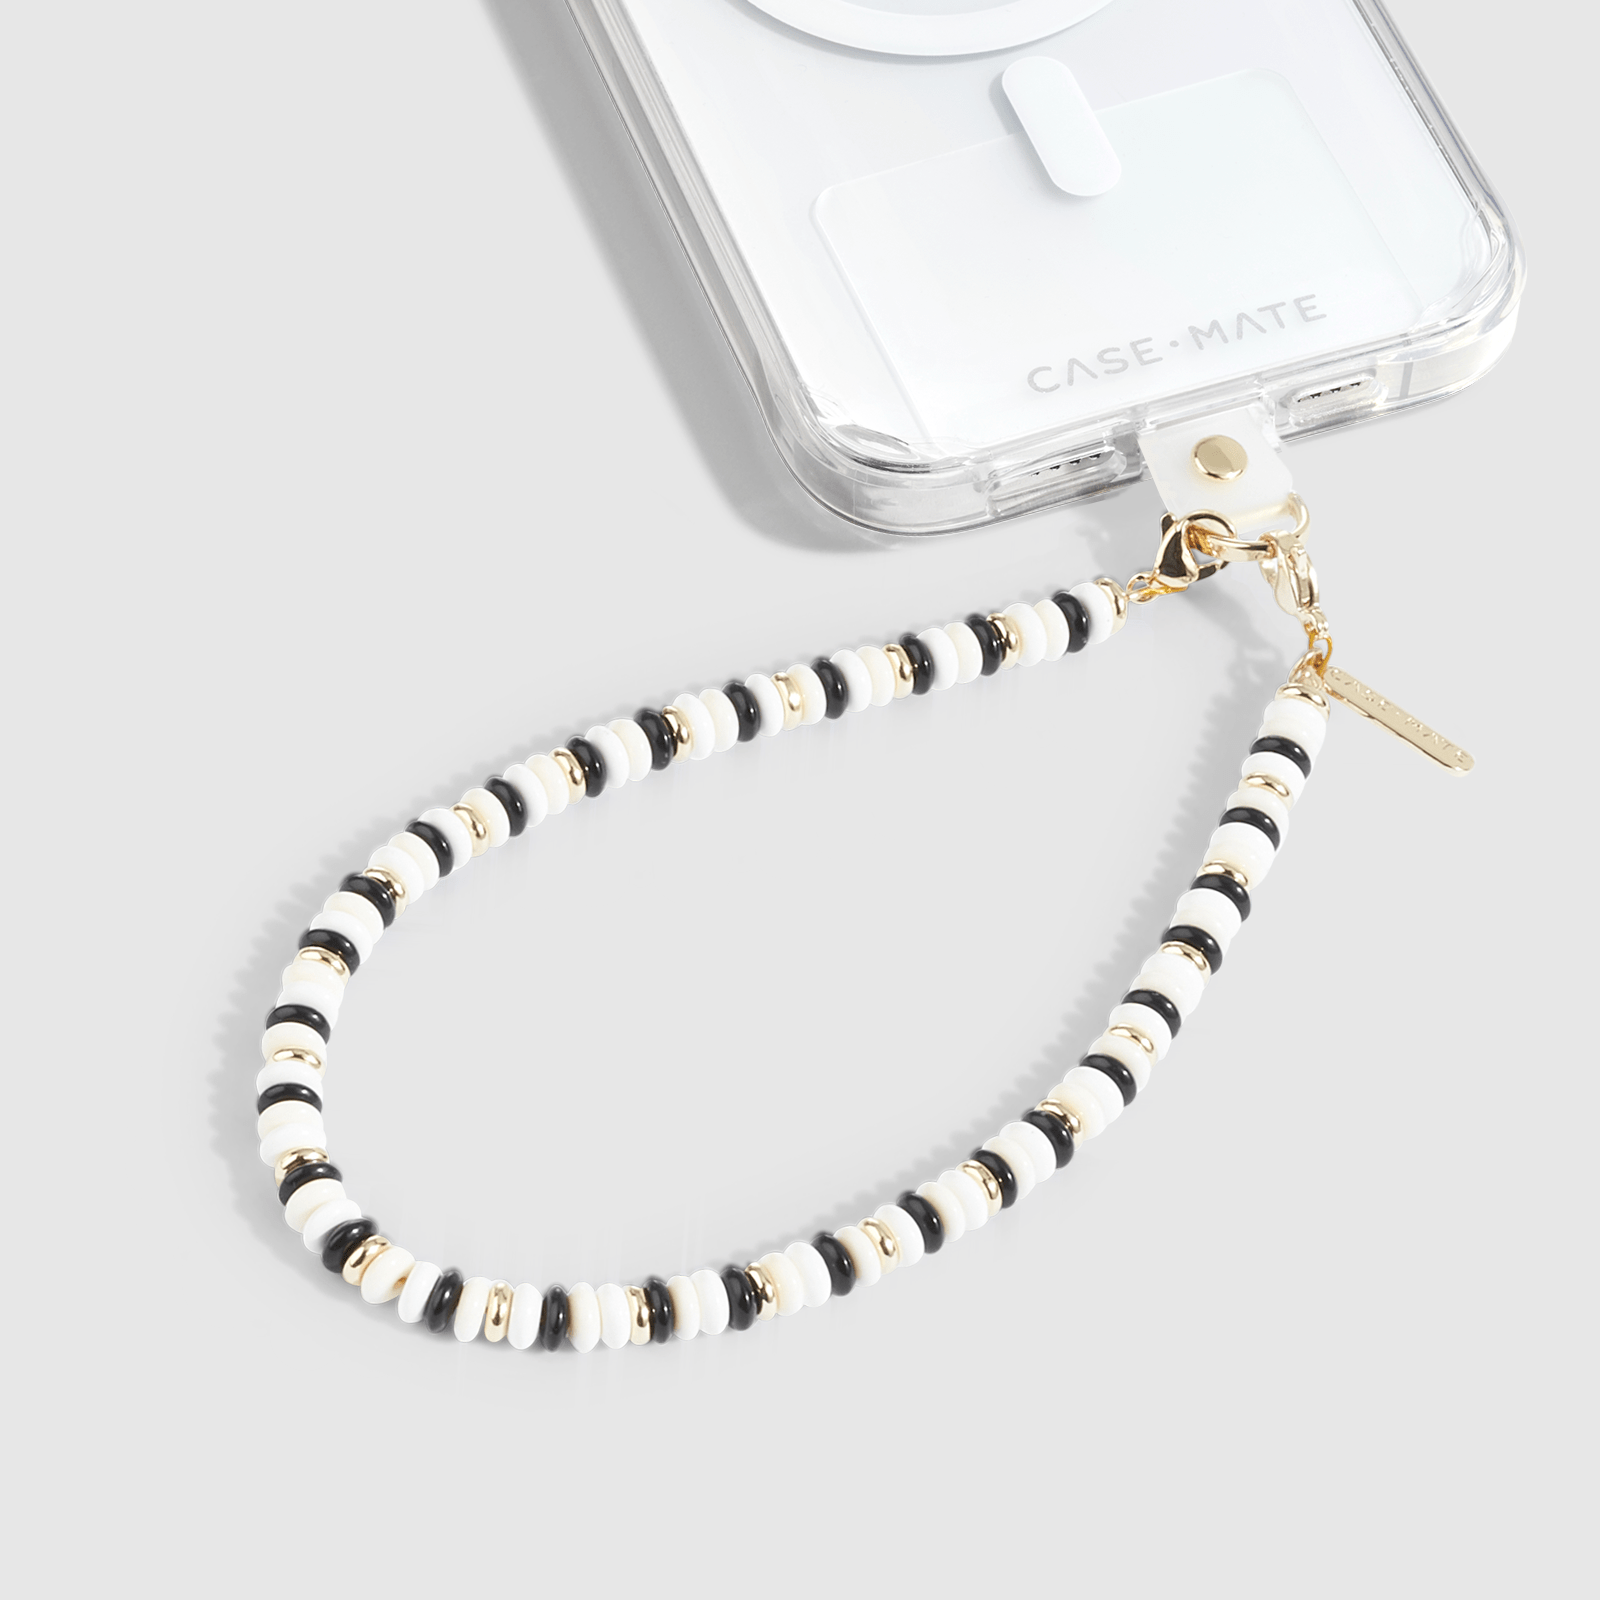 Case-Mate Phone Strap Wristlet - Dainty Gold Chain